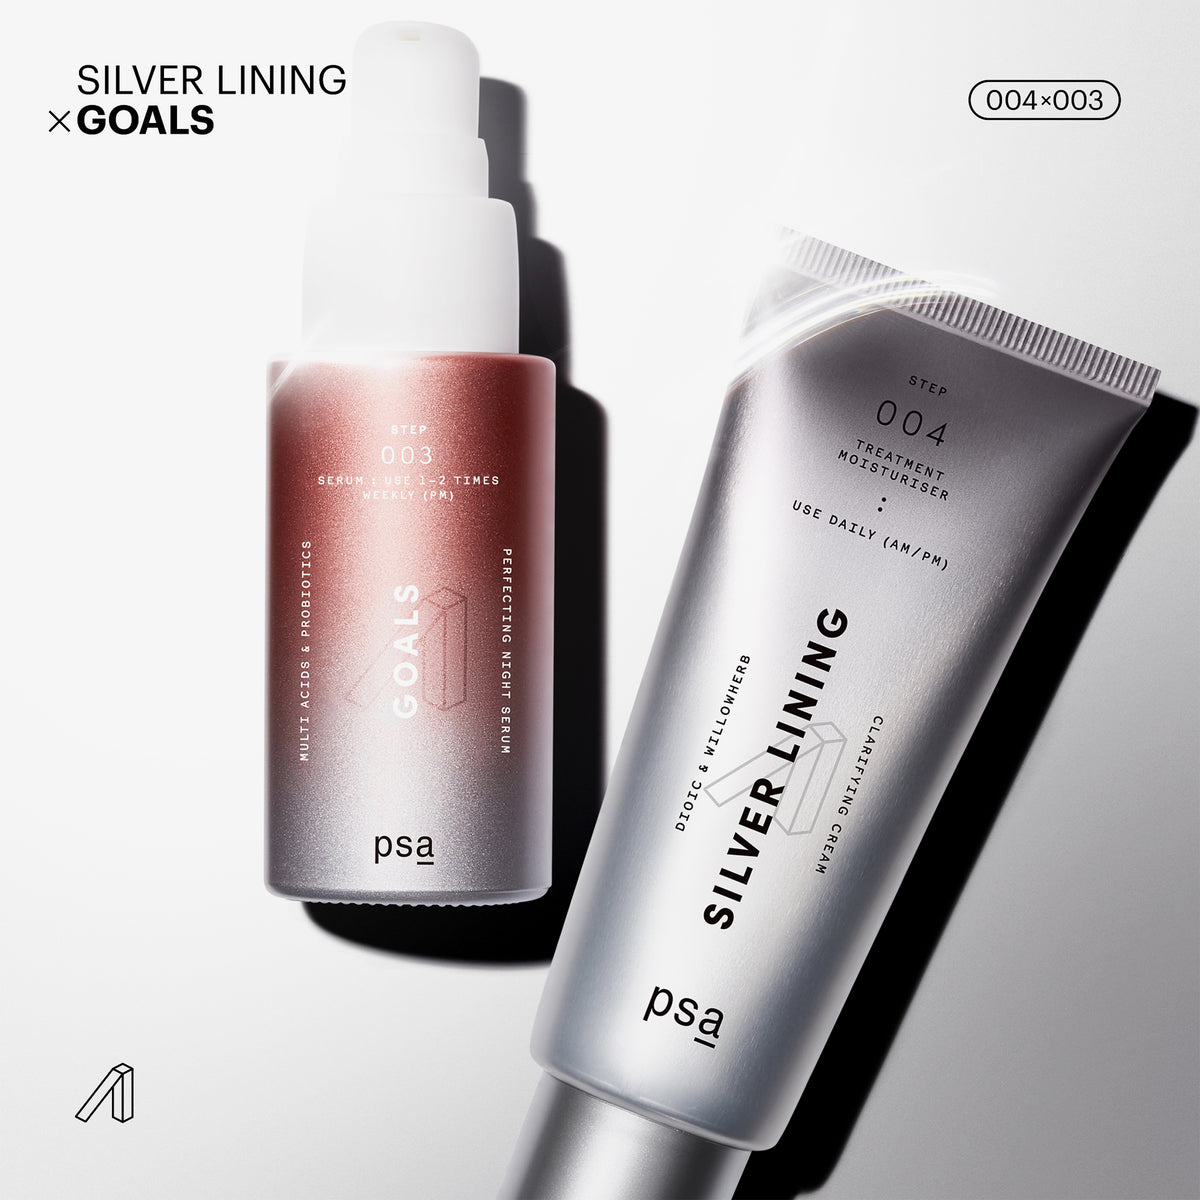 SILVER LINING Dioic & Willowherb Blemish Treatment